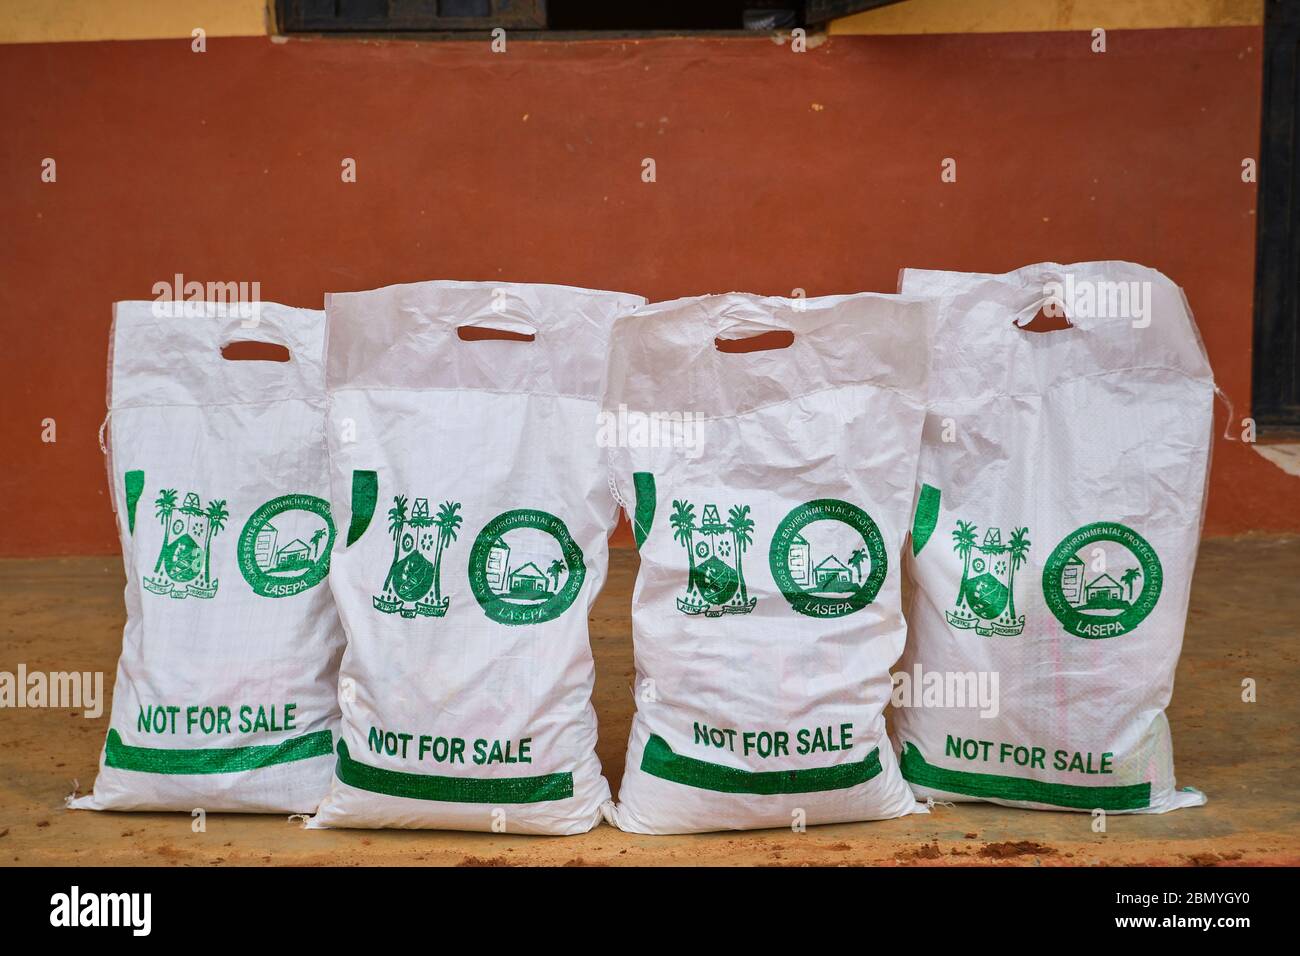 Relief packages being distributed by government during Covid-19 coronavirus pandemic in Lagos, Nigeria. Stock Photo